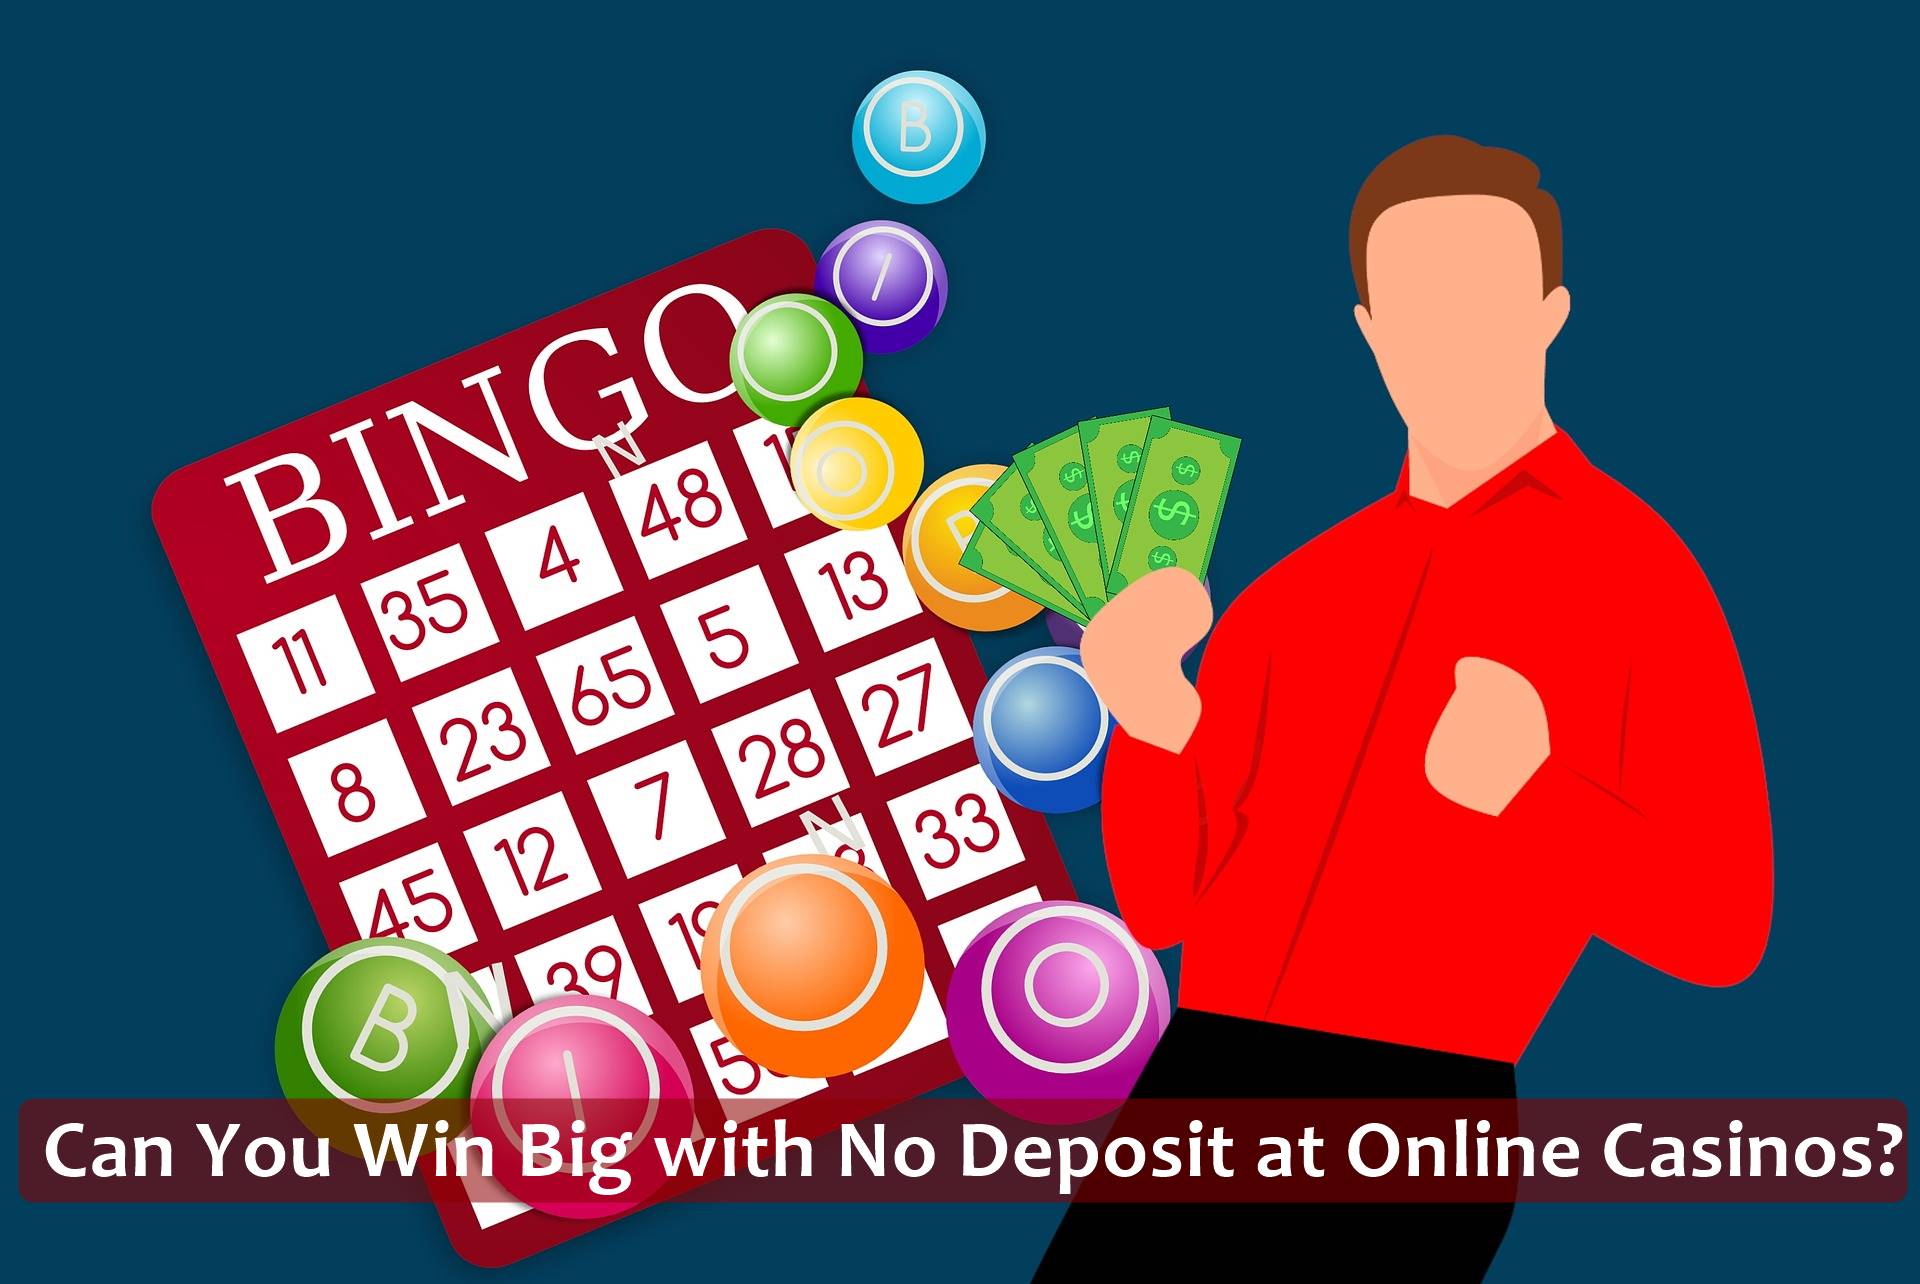 Can You Win Big with No Deposit at Online Casinos?